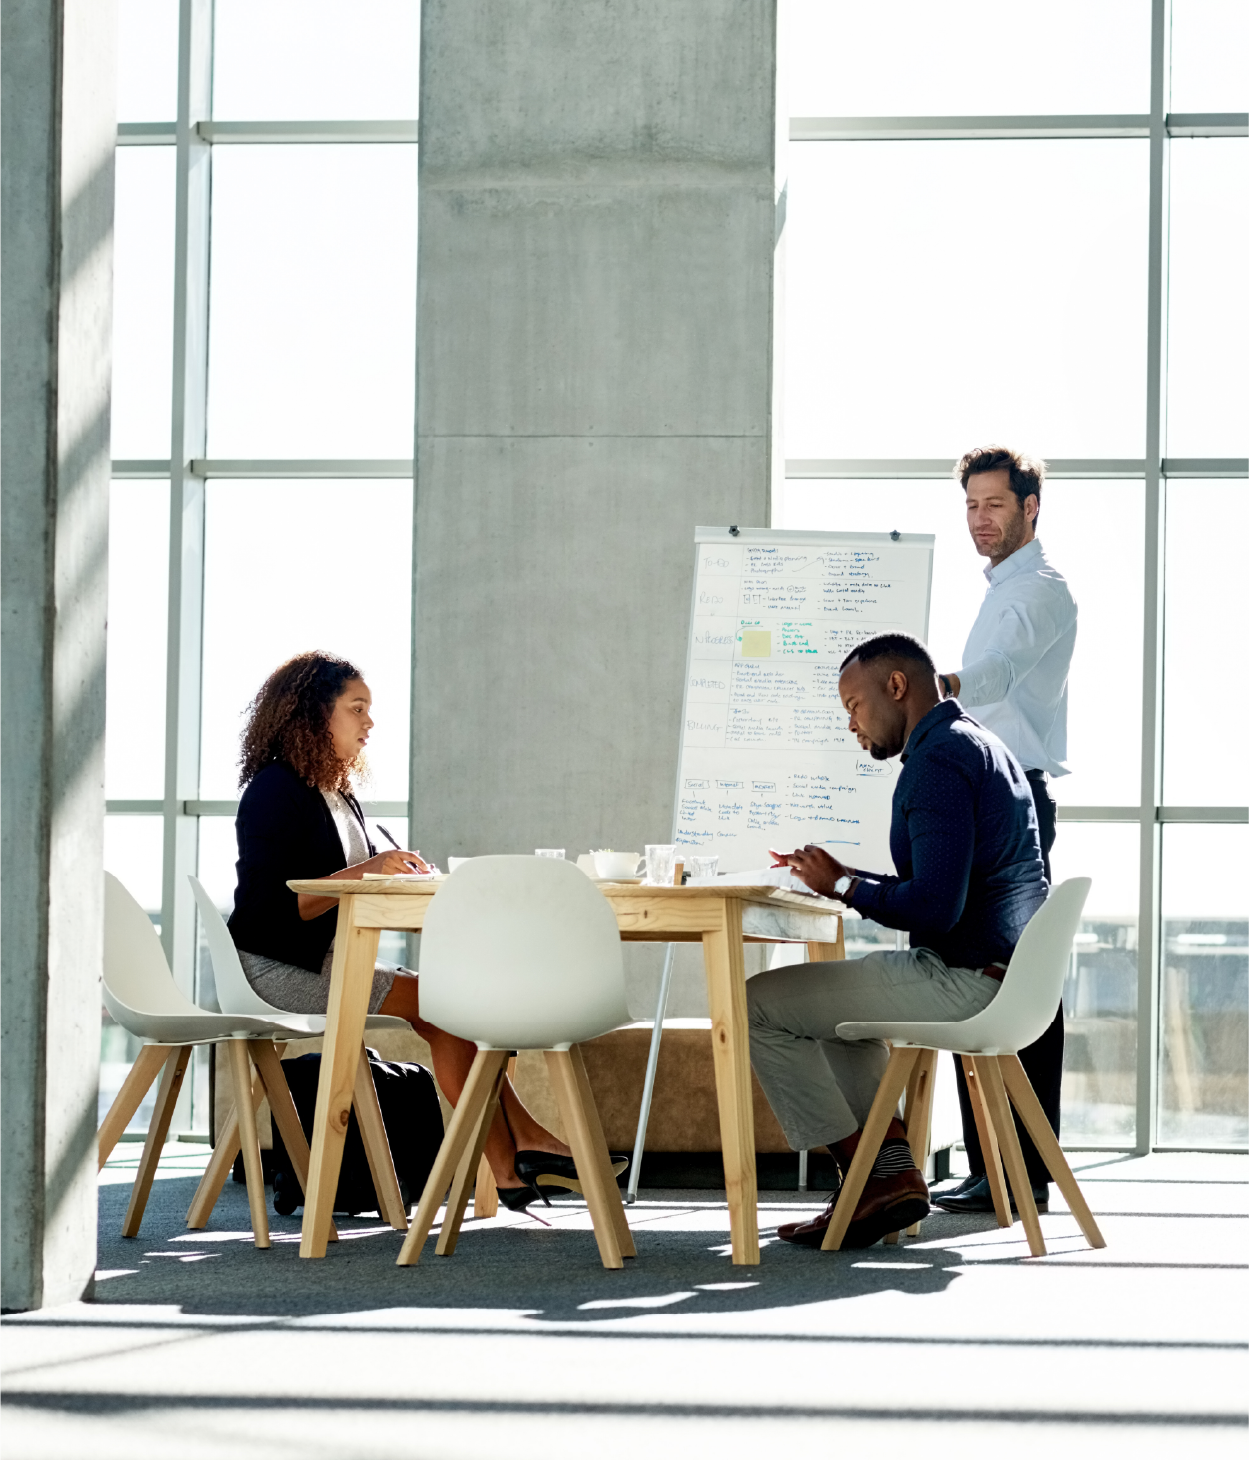 Coworkers surrounding a desk and whiteboard in a collaborative space